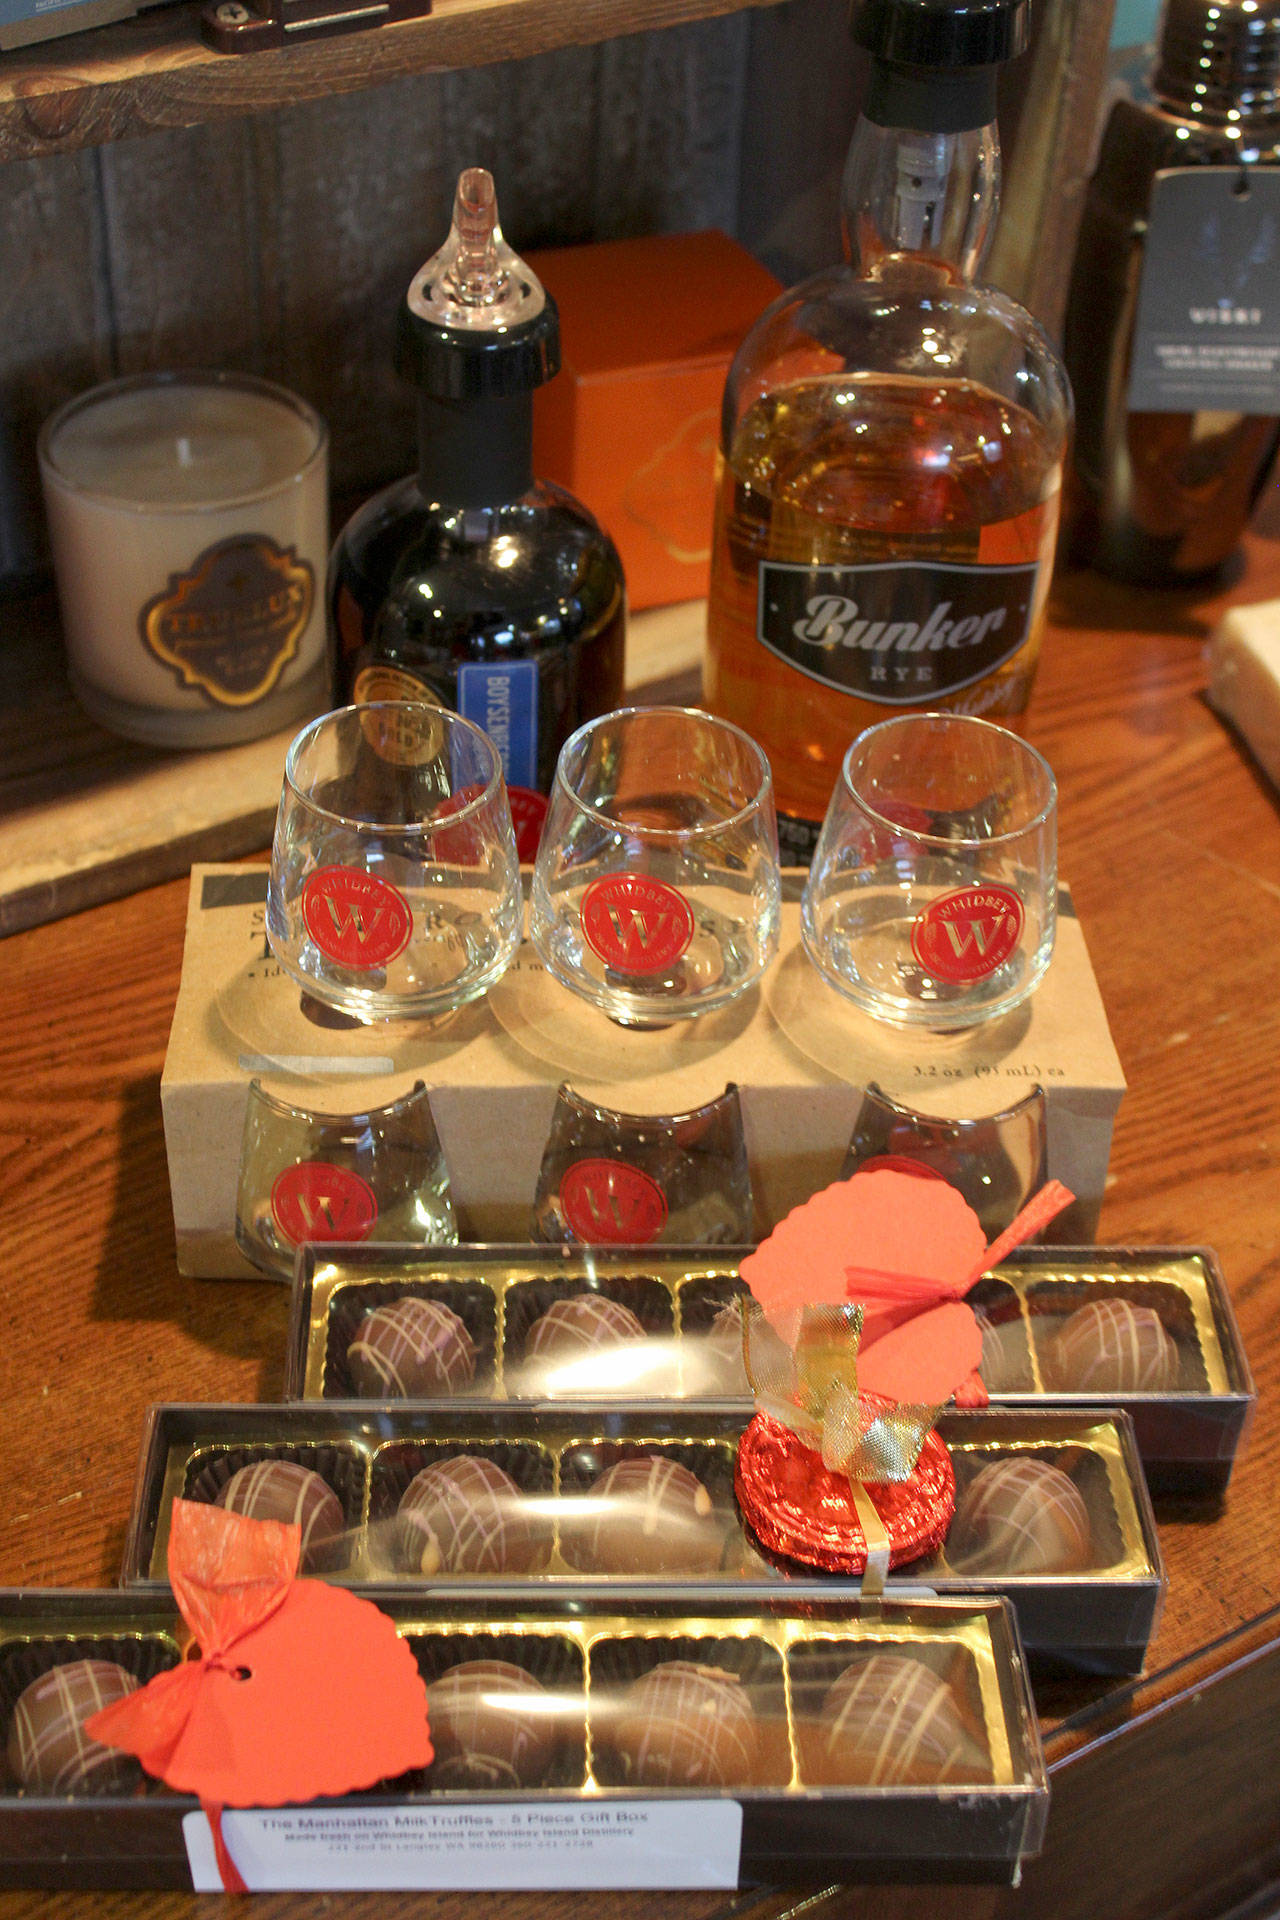 Unique desserts are created for the tour using an infusion of wine and flavored liqueur in dark chocolate. Sweet Mona’s of Langley fuses Whidbey Island Distillery’s whiskey and boysenberry liqueur to create Manhattan truffles.